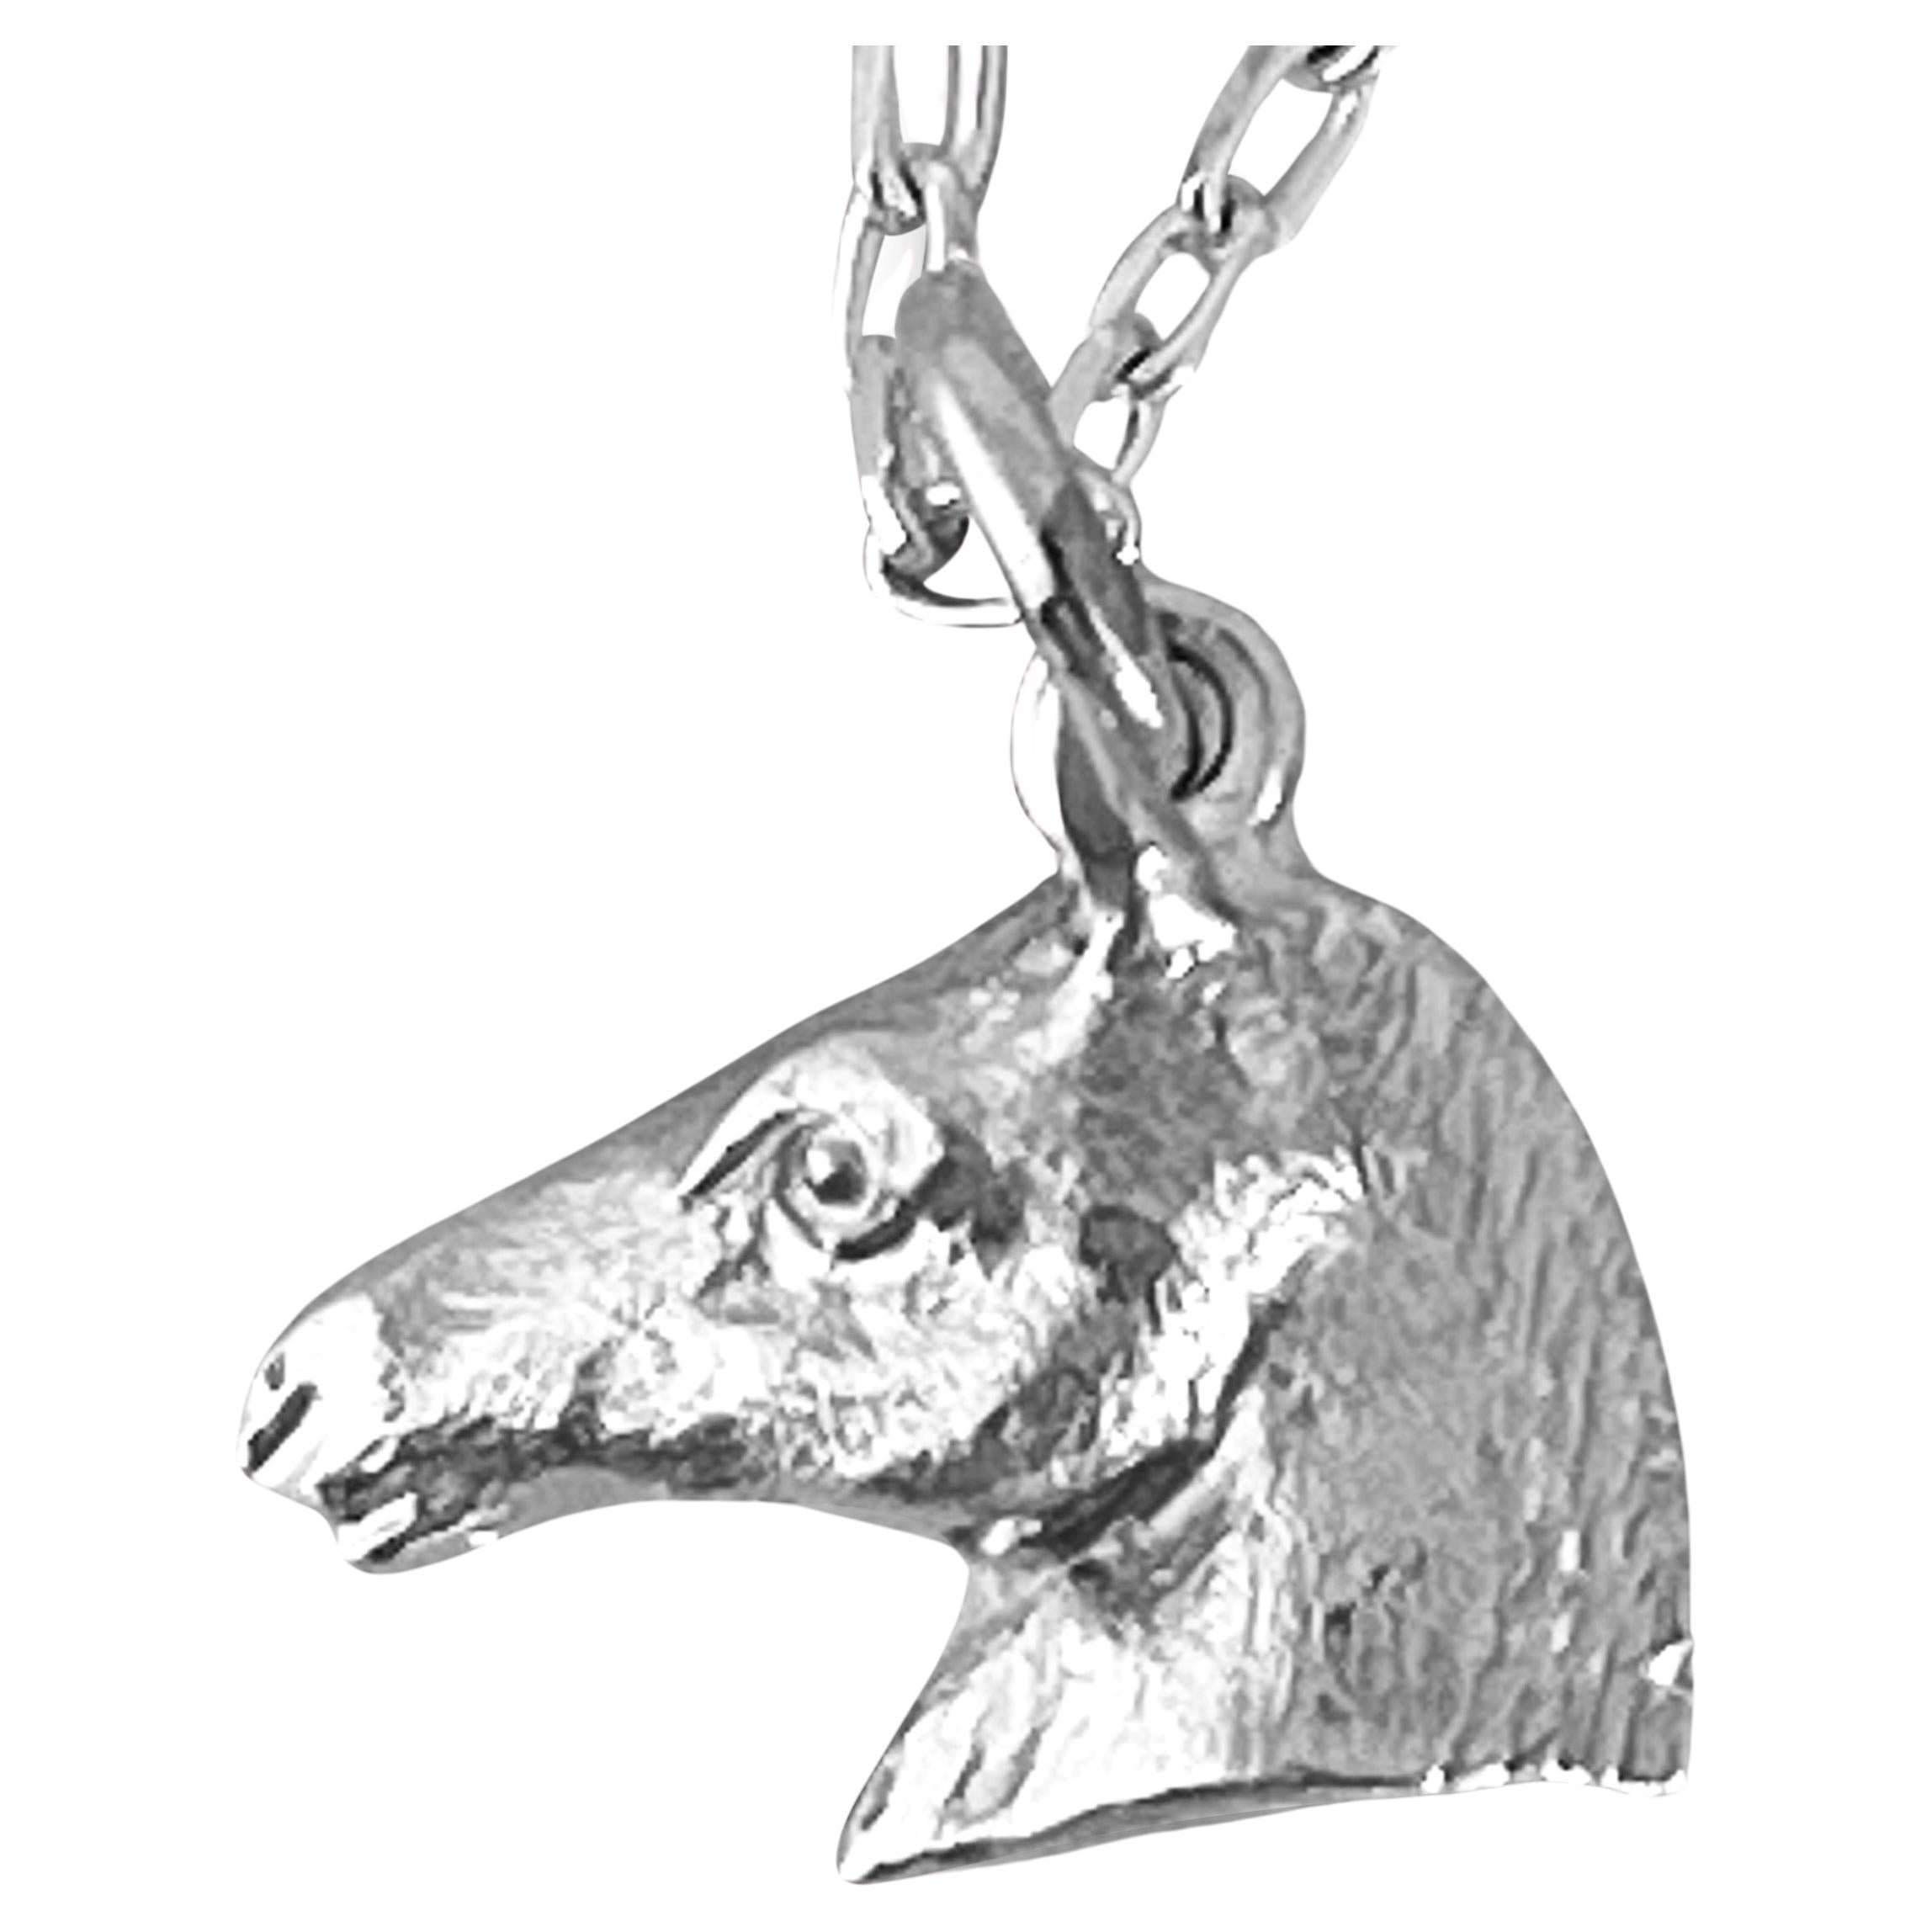 Paul Eaton Sculpted Miniature Horse Head in a Sterling Silver Charm or Pendant  For Sale